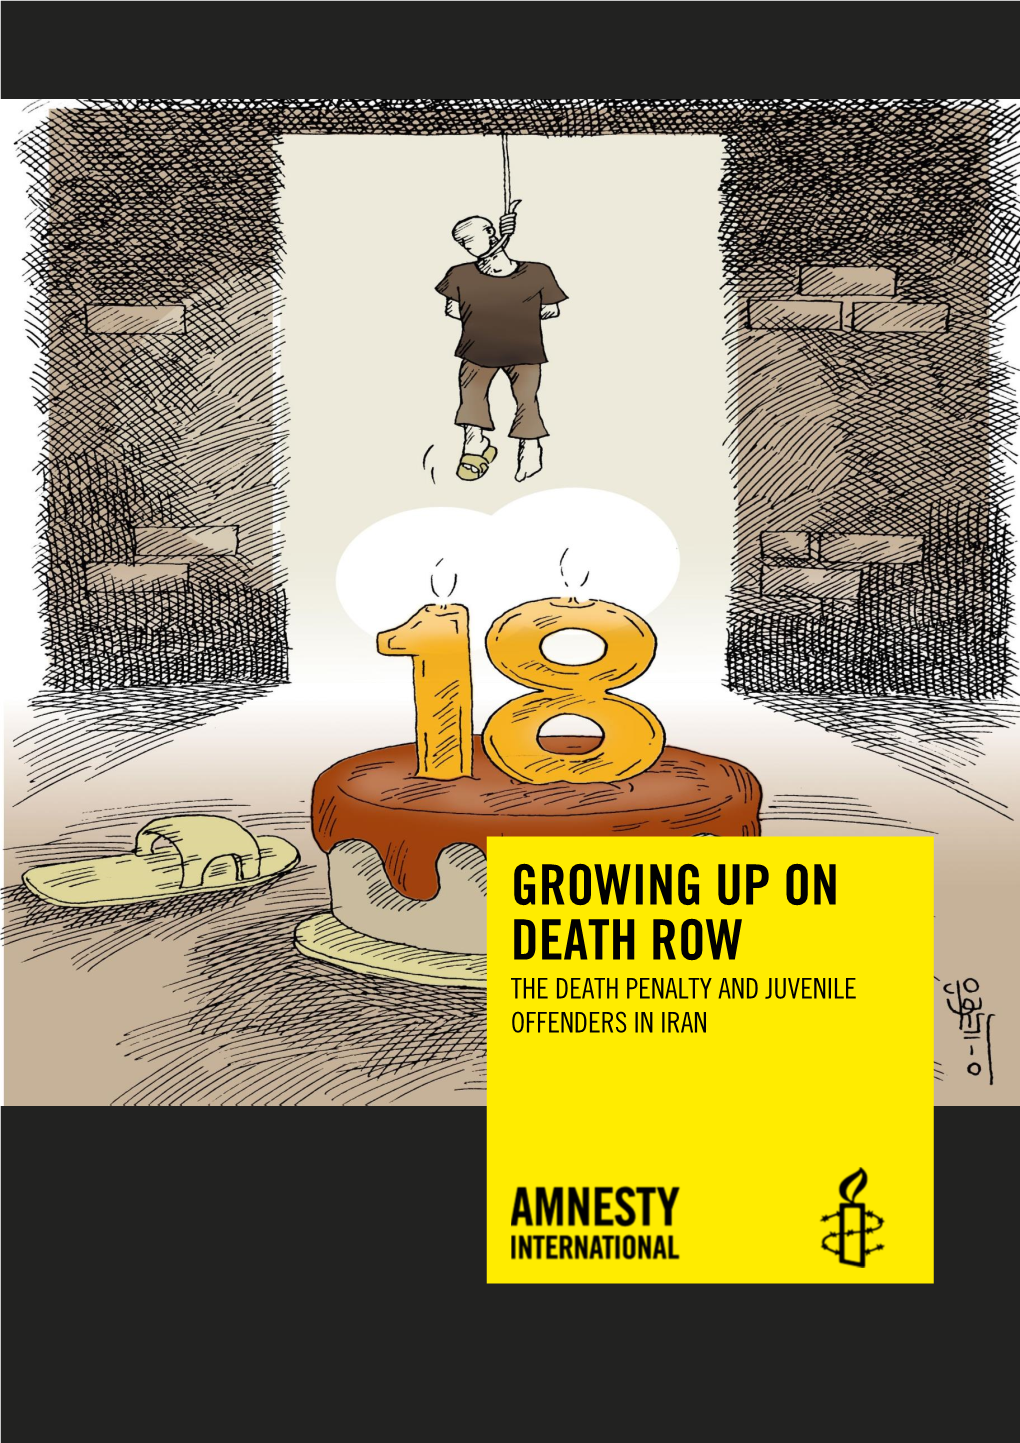 Growing up on Death Row the Death Penalty and Juvenile Offenders in Iran